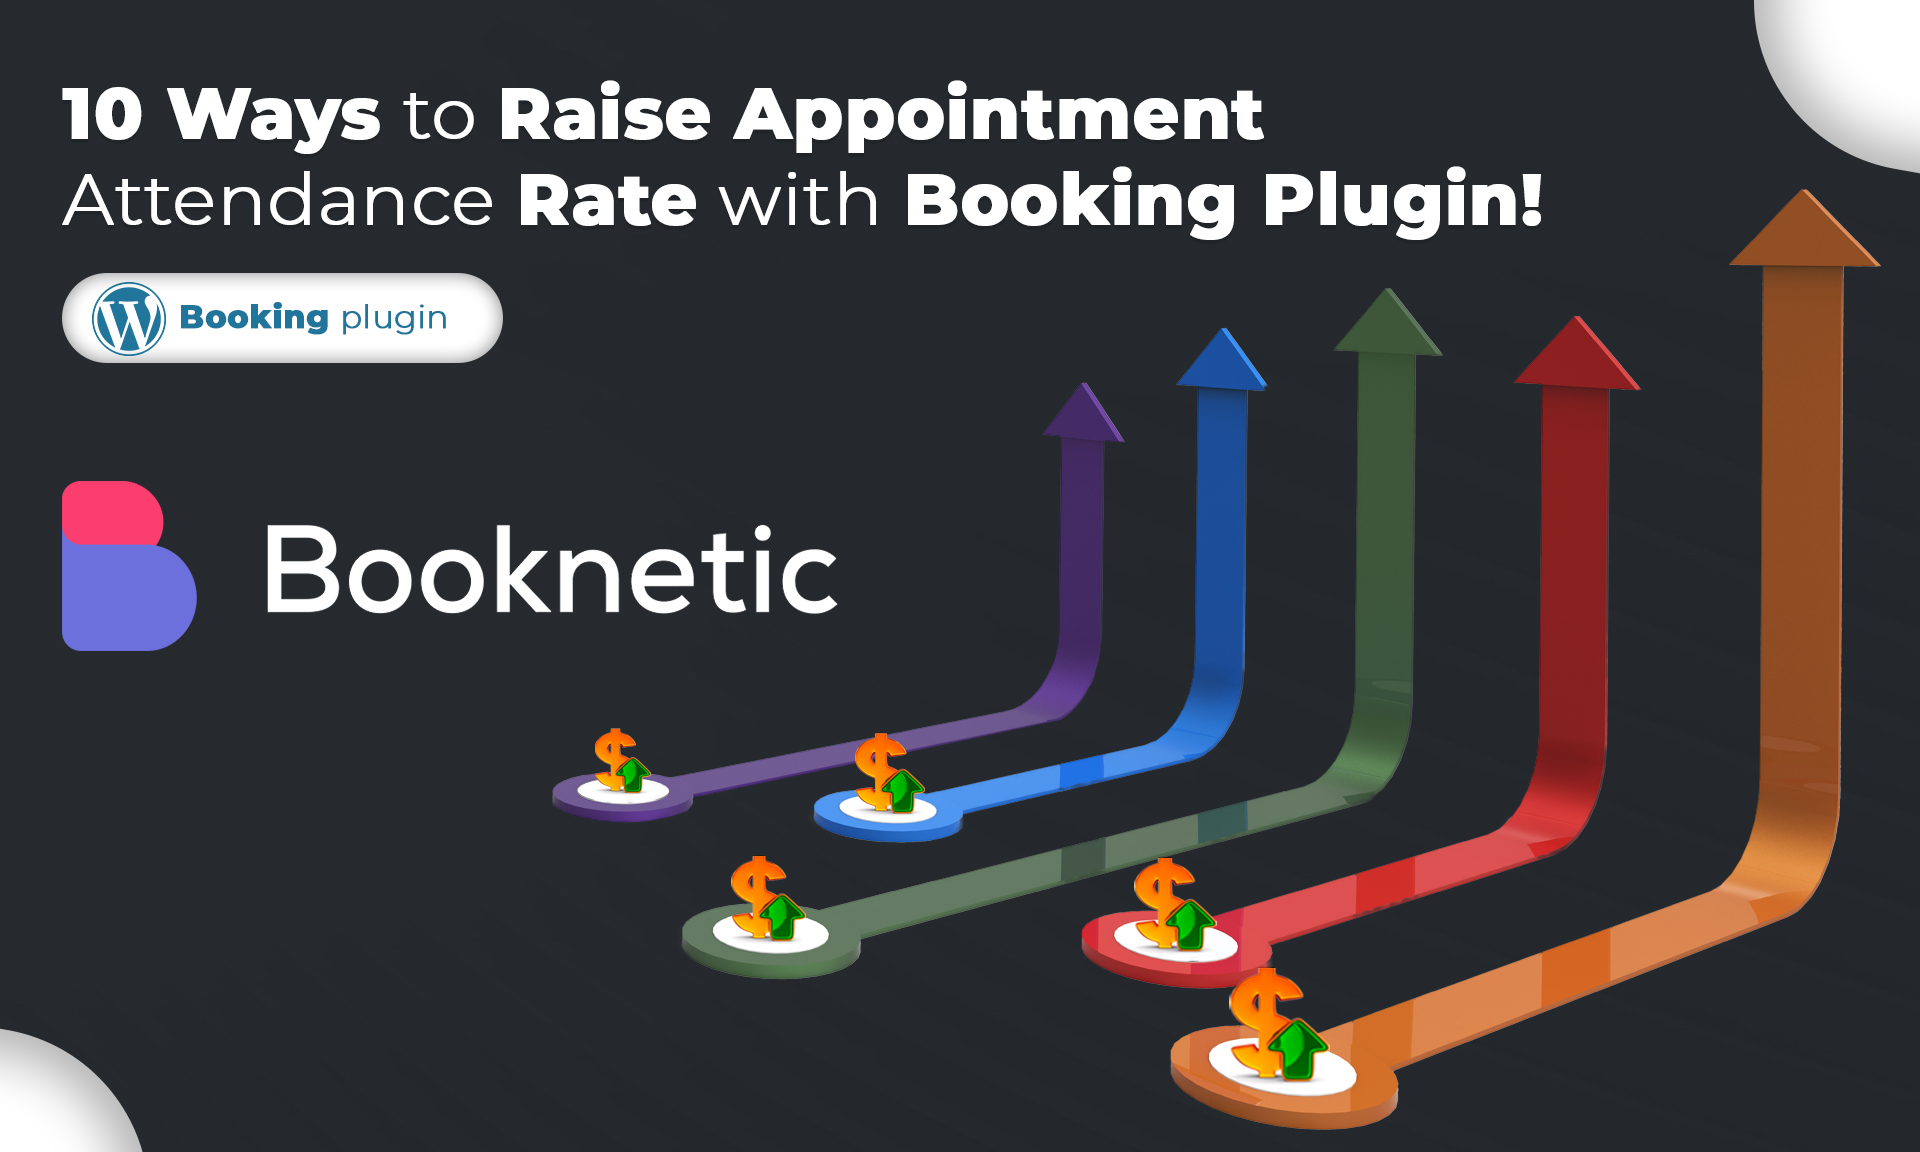 10 Ways to Raise Appointment Attendance Rate with Booking Plugin